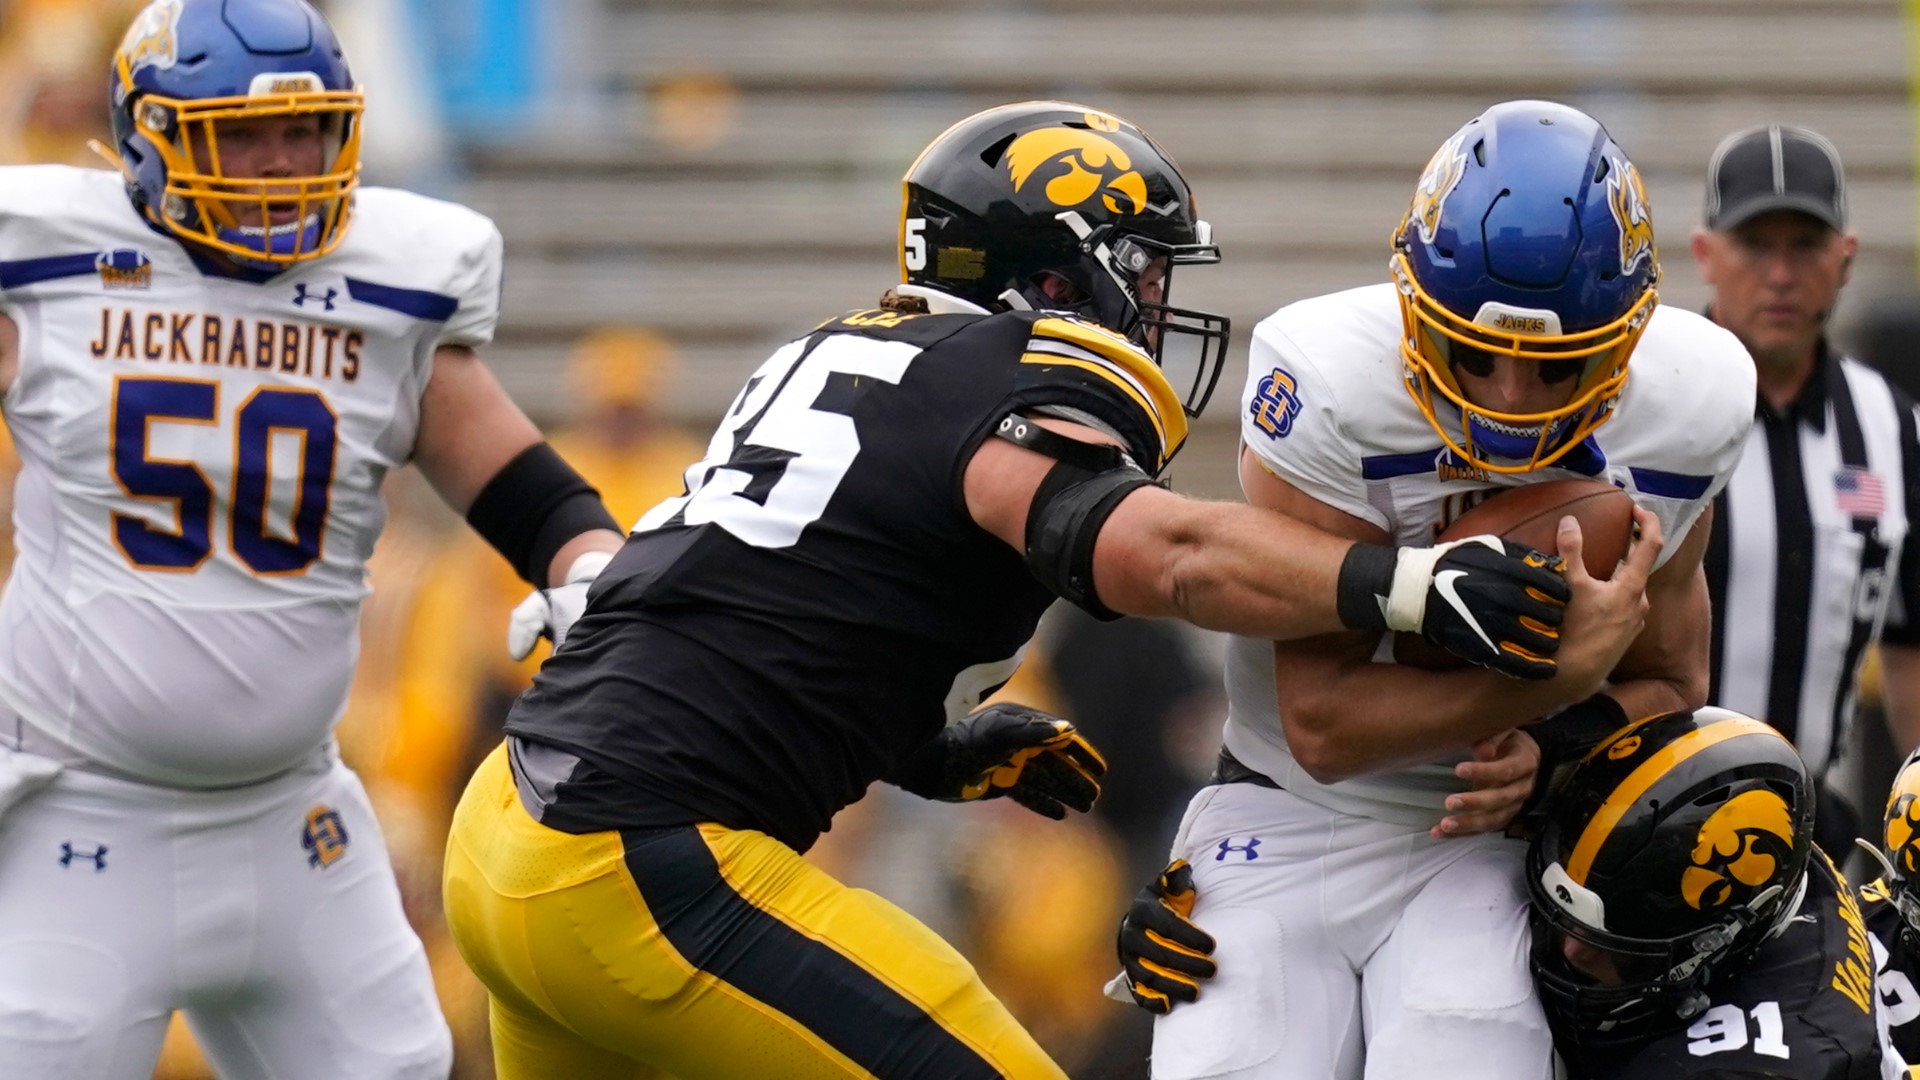 Iowa’s defense came up with two second-half safeties, and the Hawkeyes opened the season with a 7-3 win over South Dakota State on Saturday.